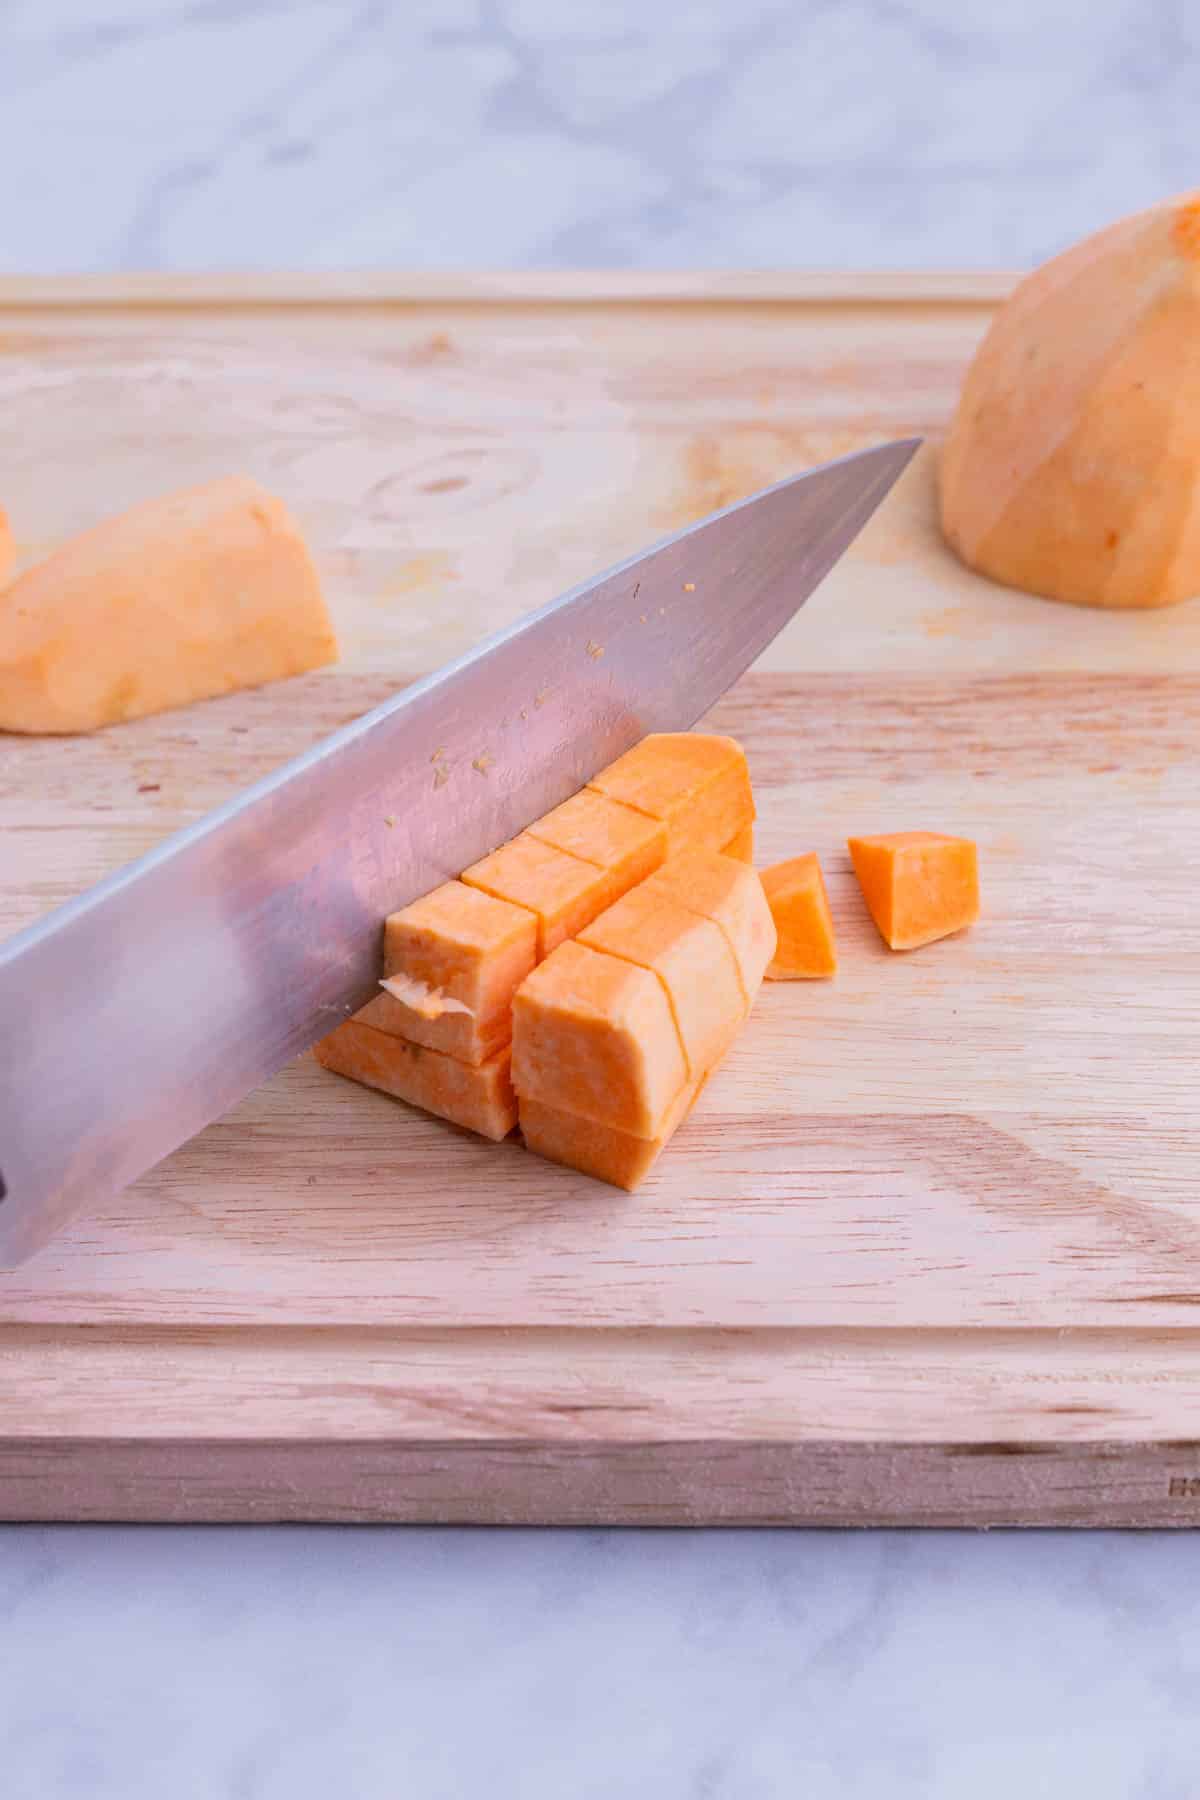 Sweet potatoes are diced on a cutting board.